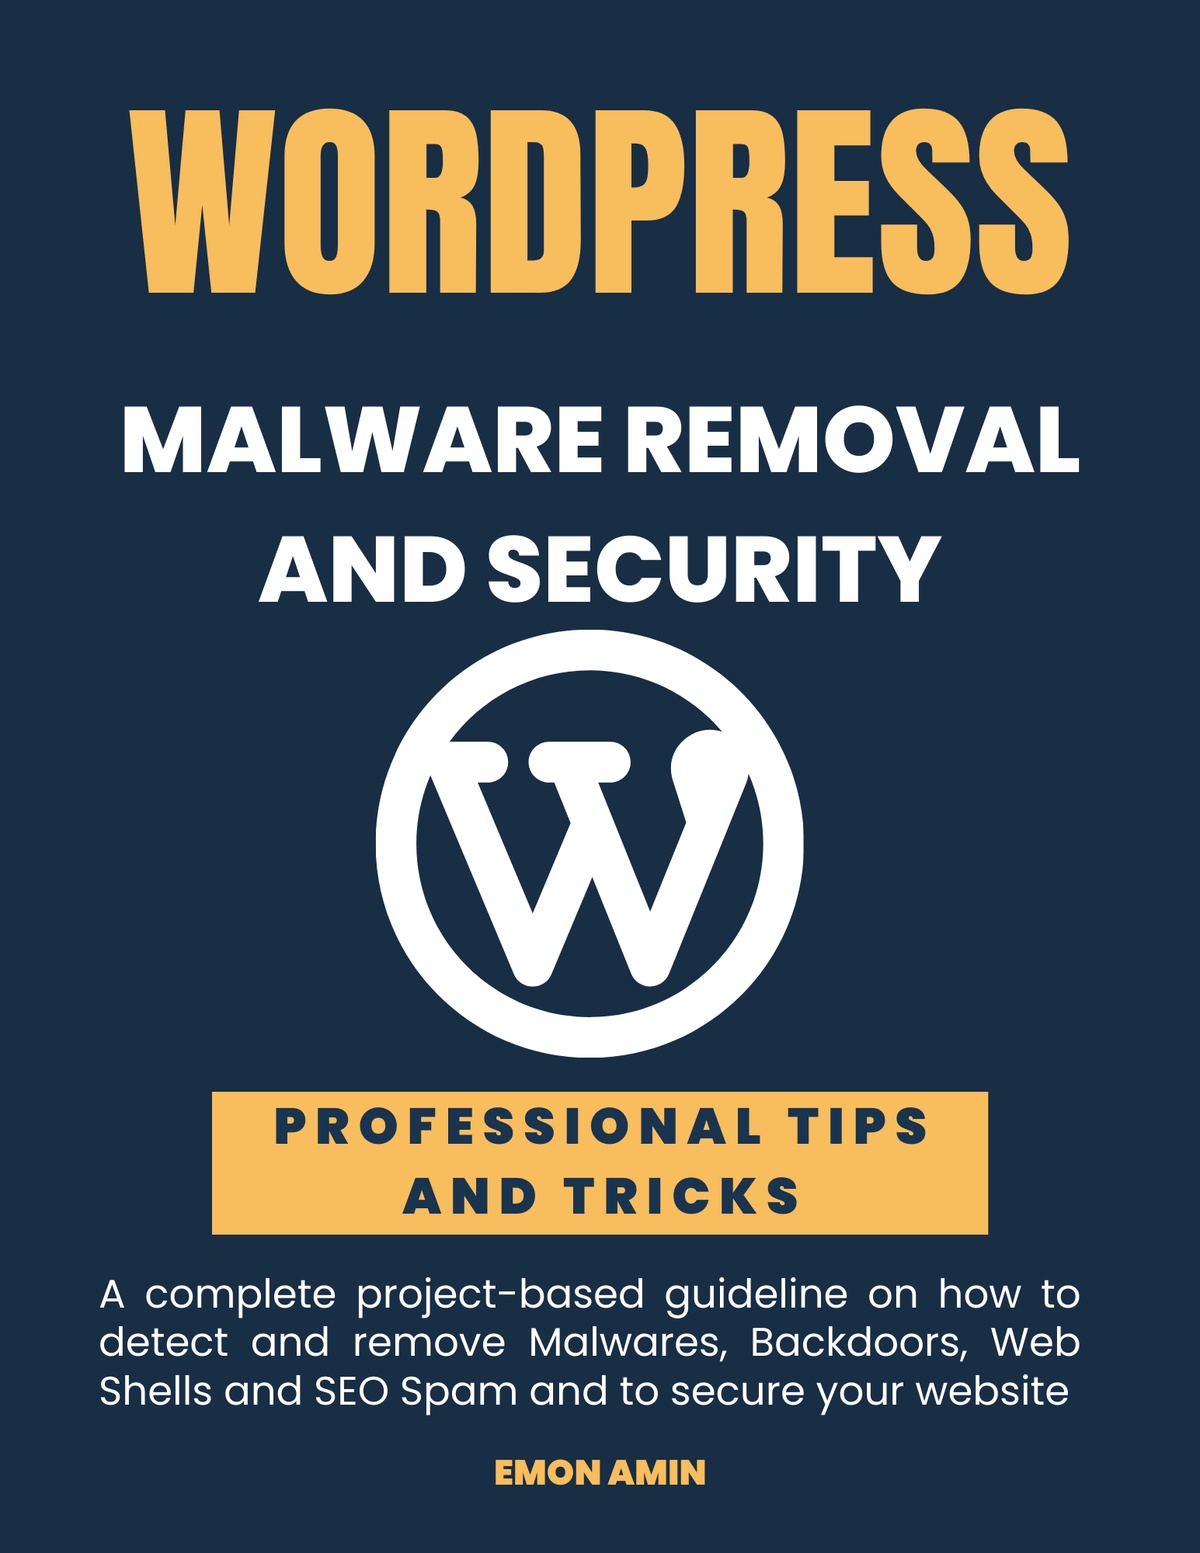 Strengthen Your WordPress Security with Our Easy-to-Understand eBook!